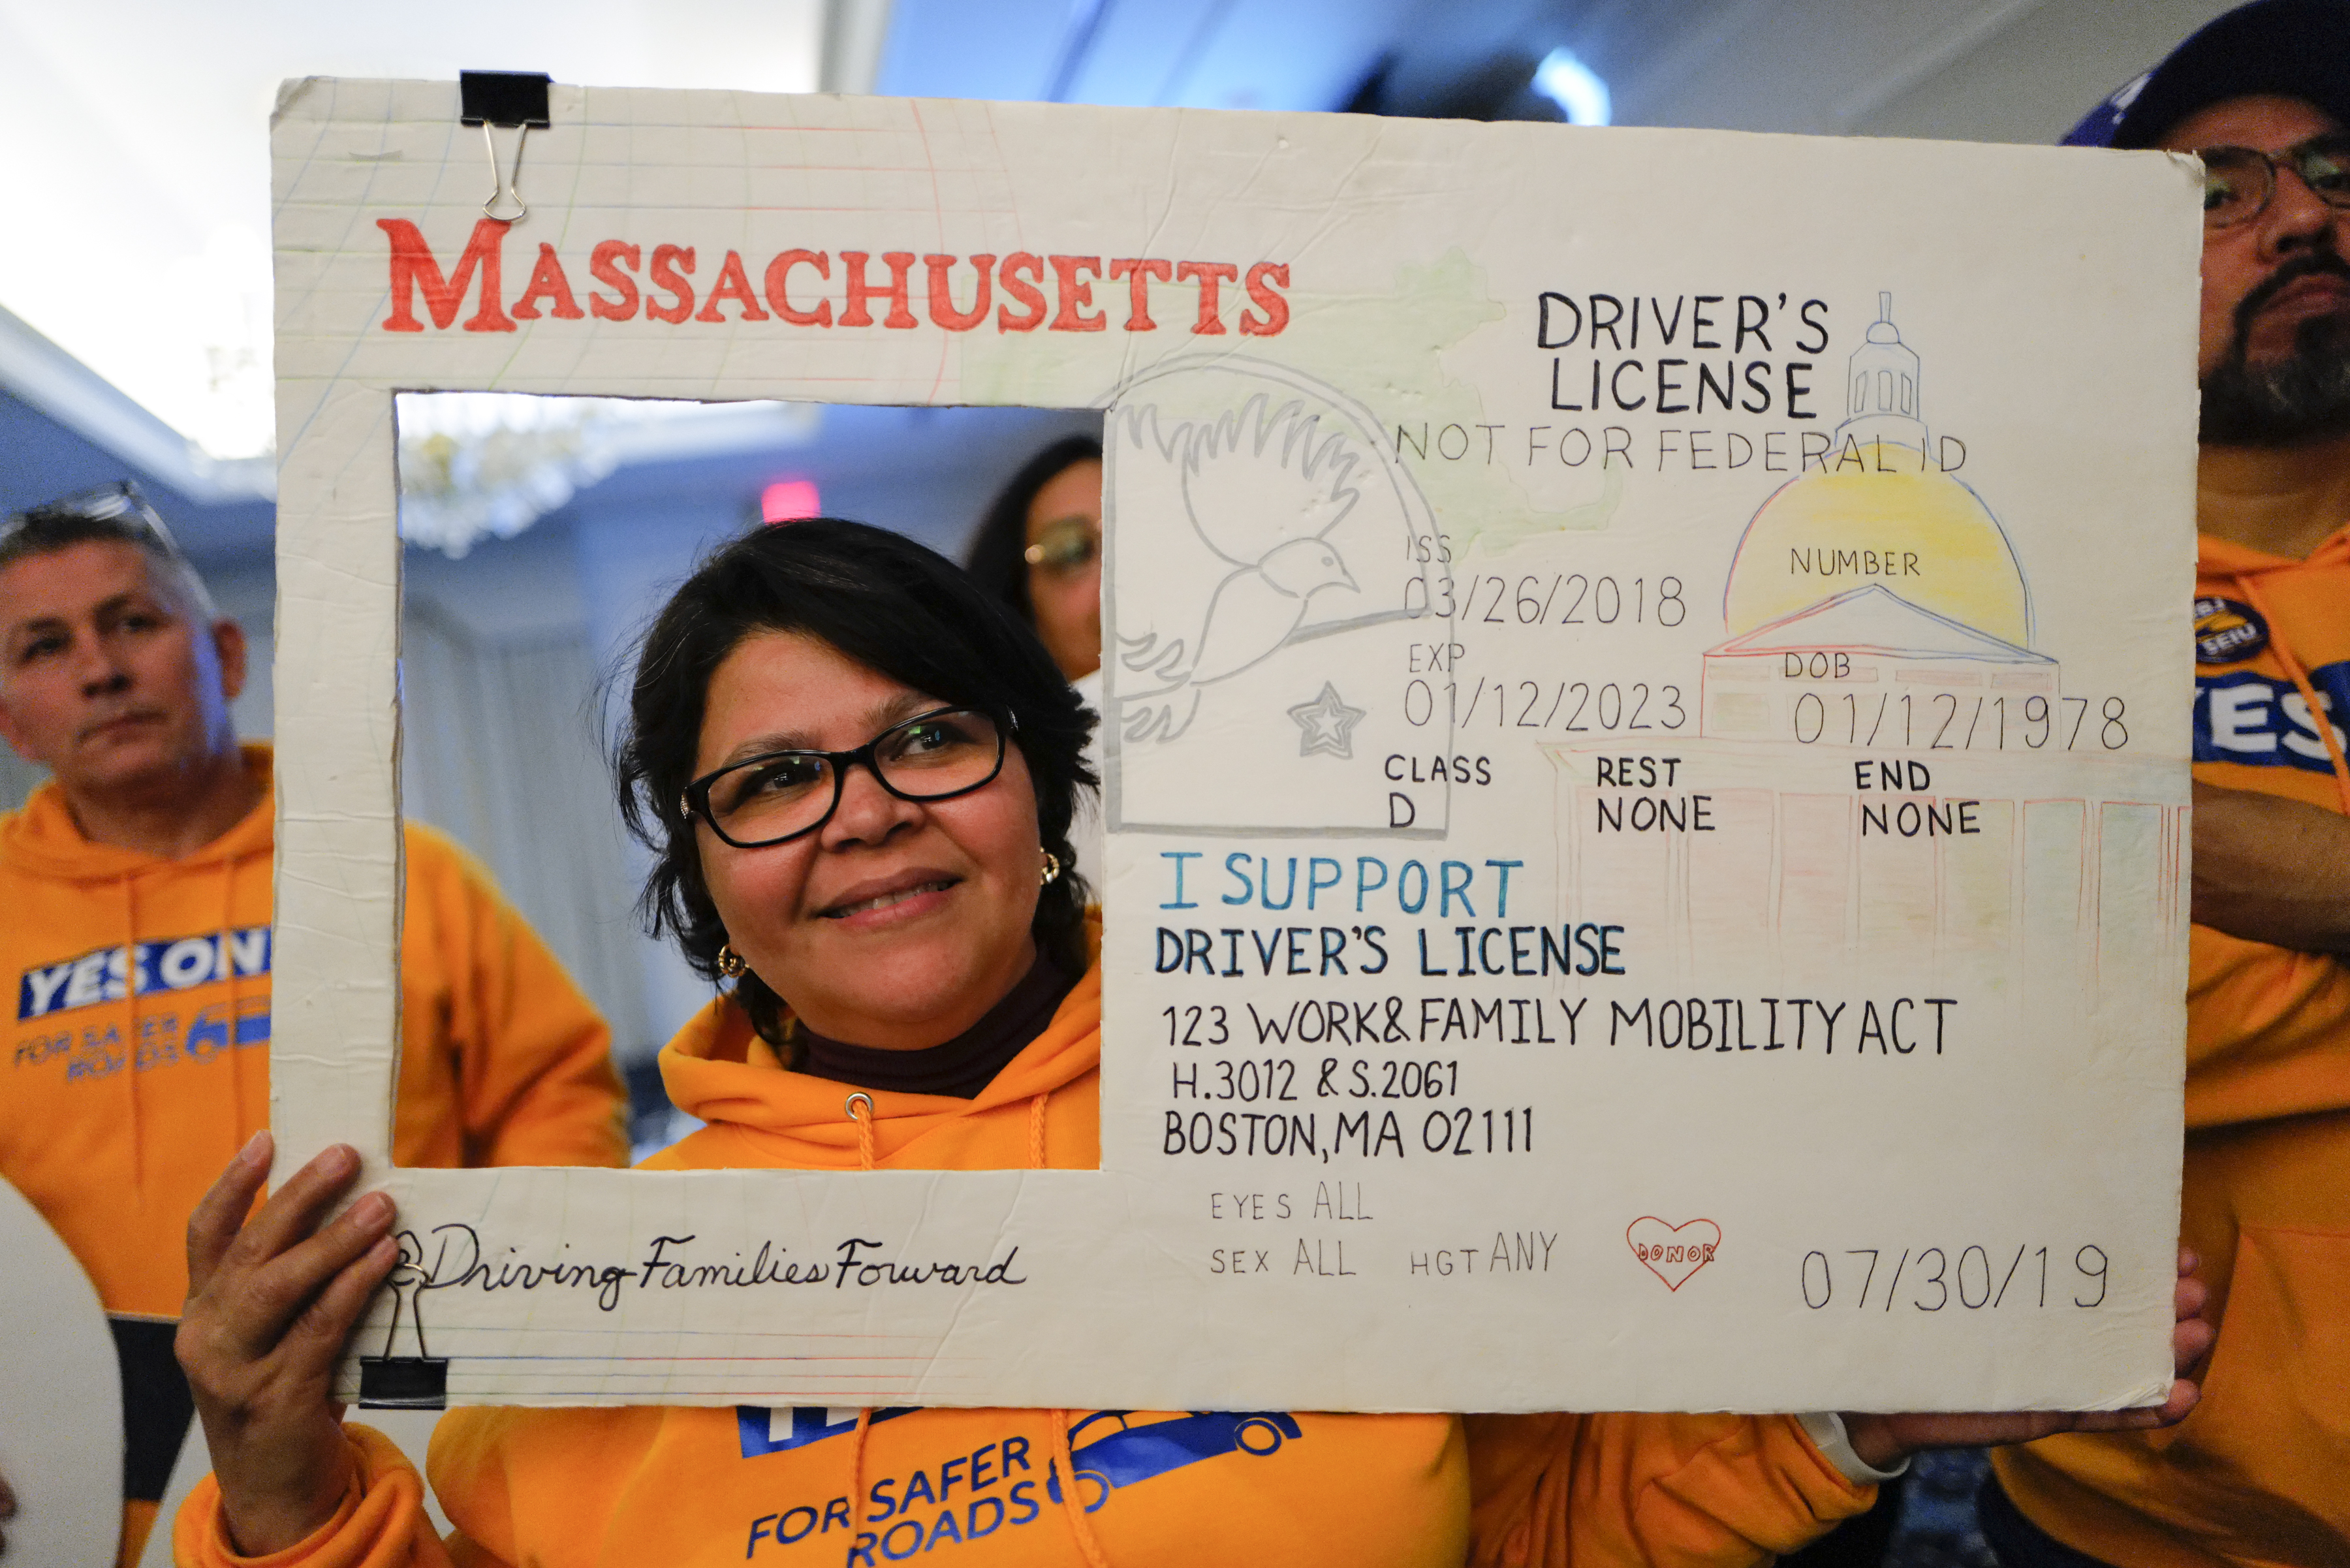 New law allows all immigrants to drive in Mass. - The Bay State Banner